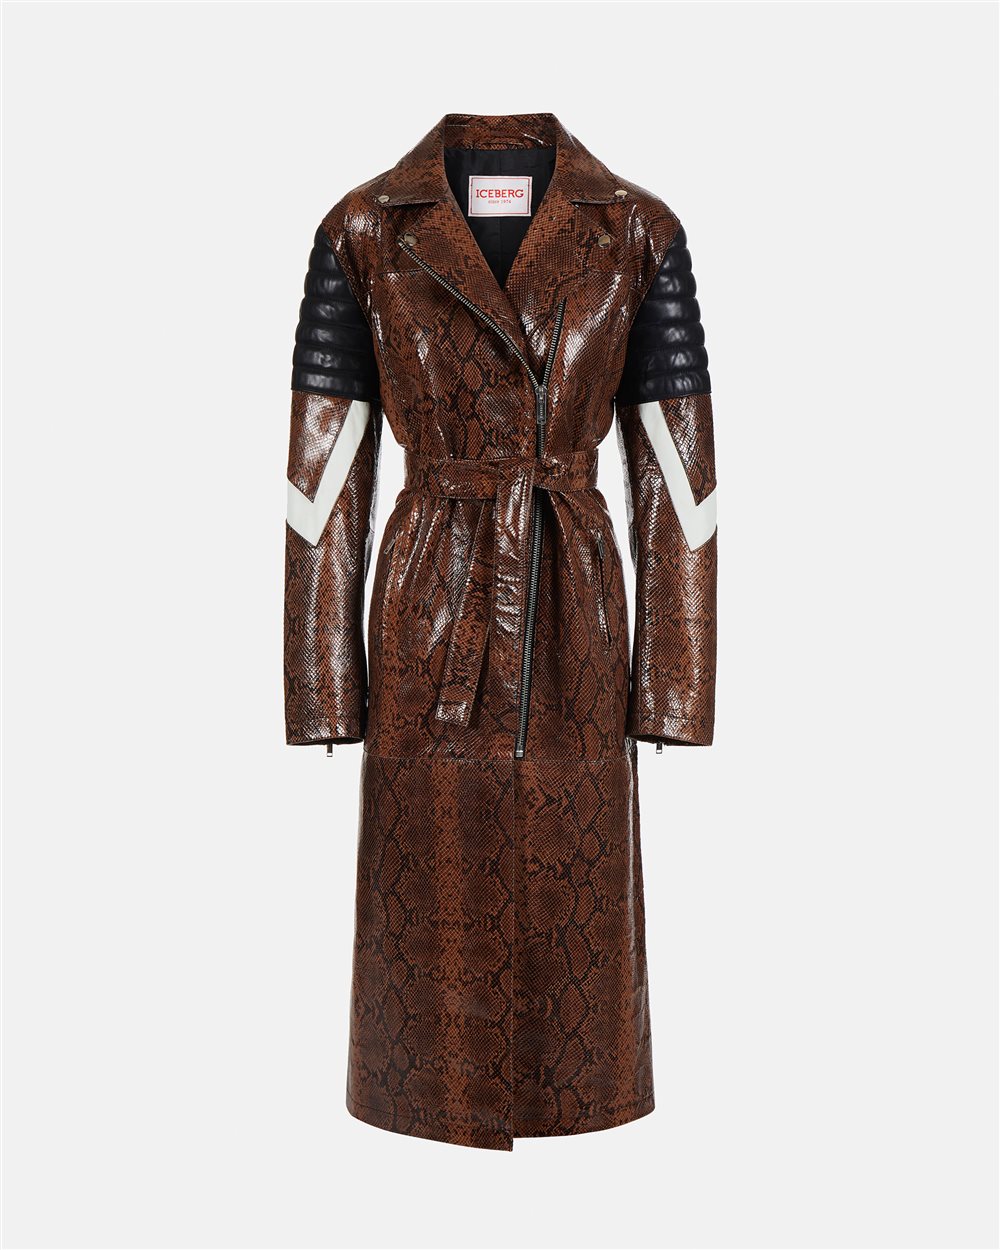 Snake print eco-leather trench coat - Iceberg - Official Website